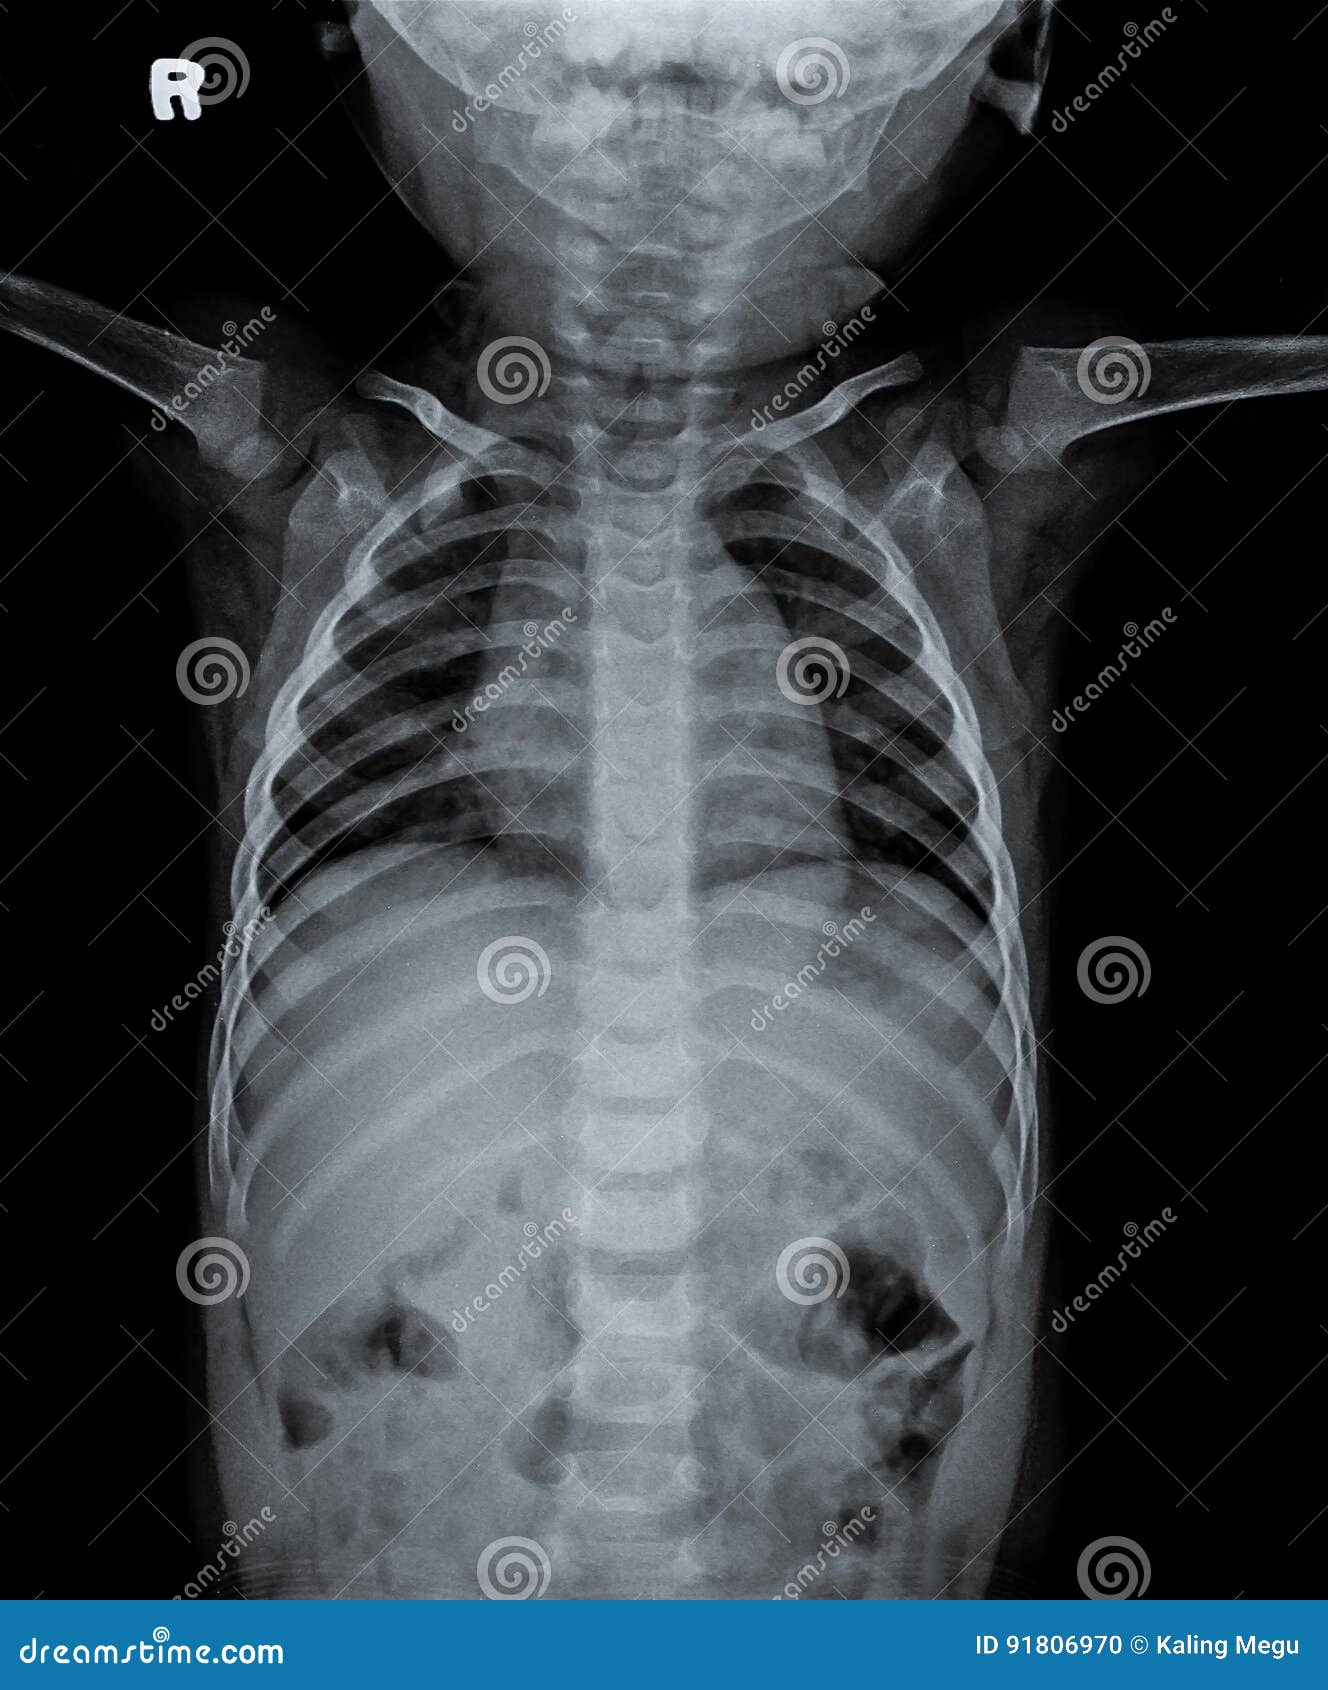 baby chest x ray device